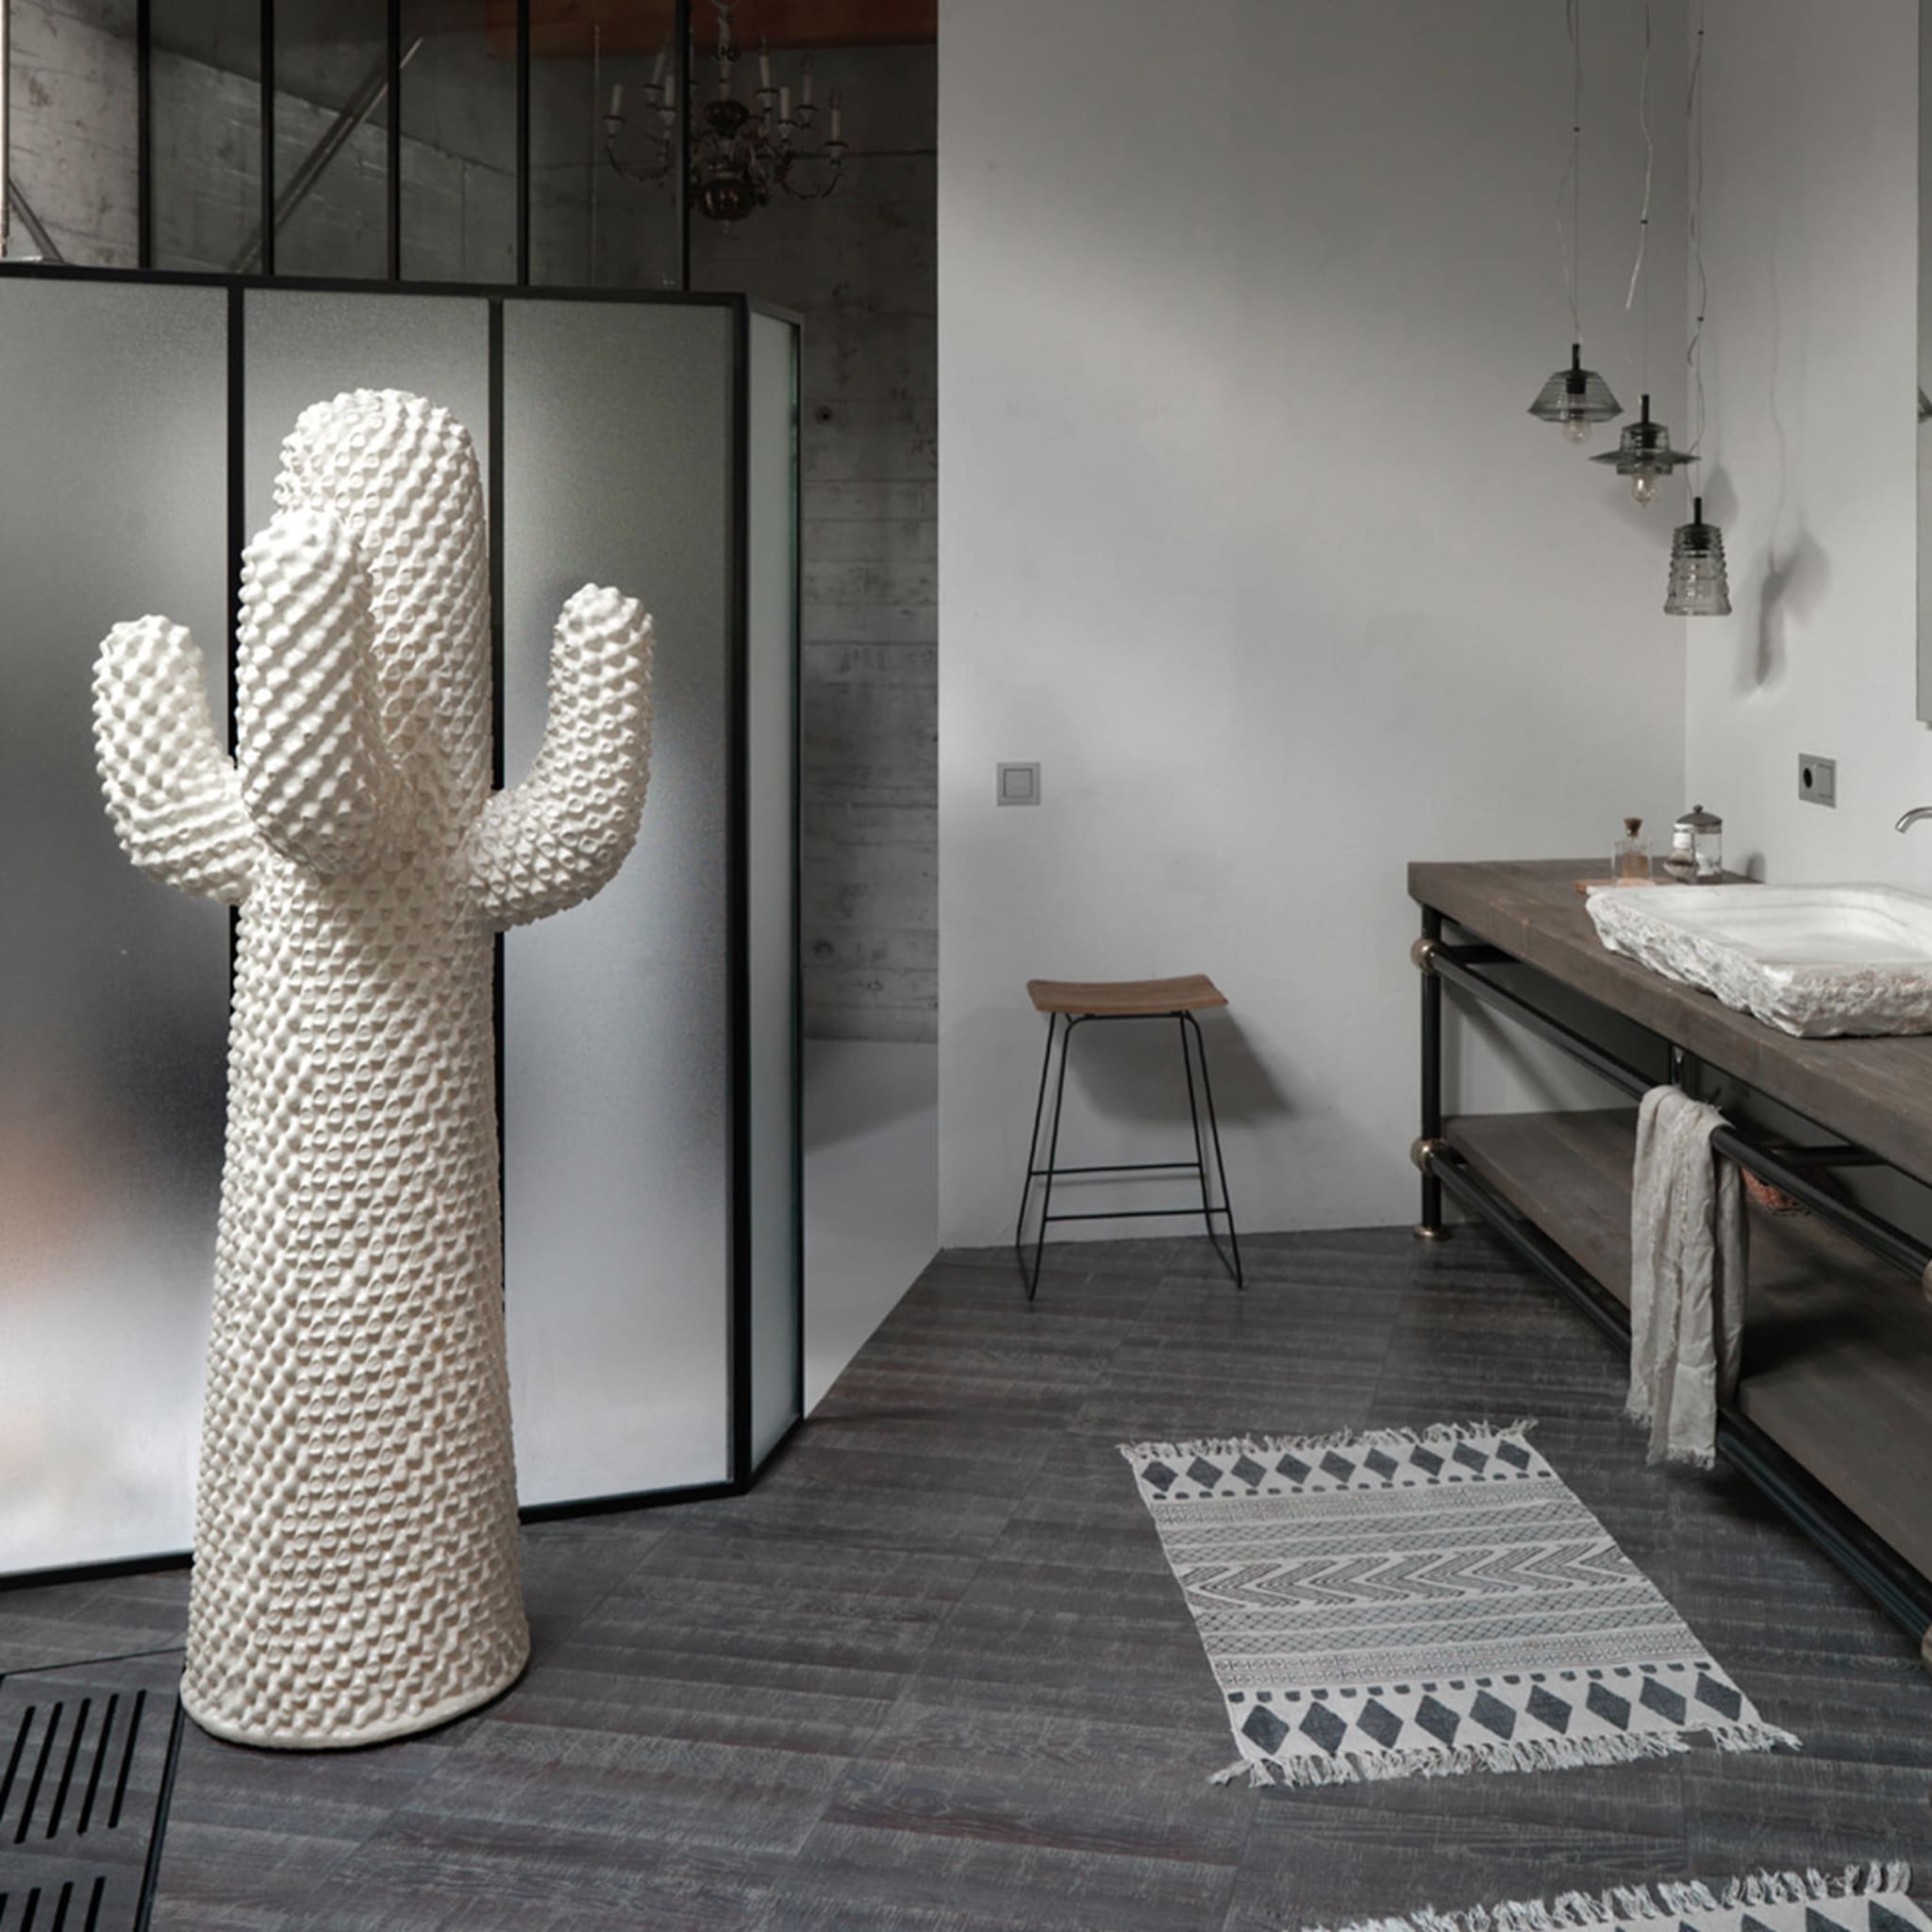 Another White Cactus Coat Stand by Drocco/Mello - Alternative view 1